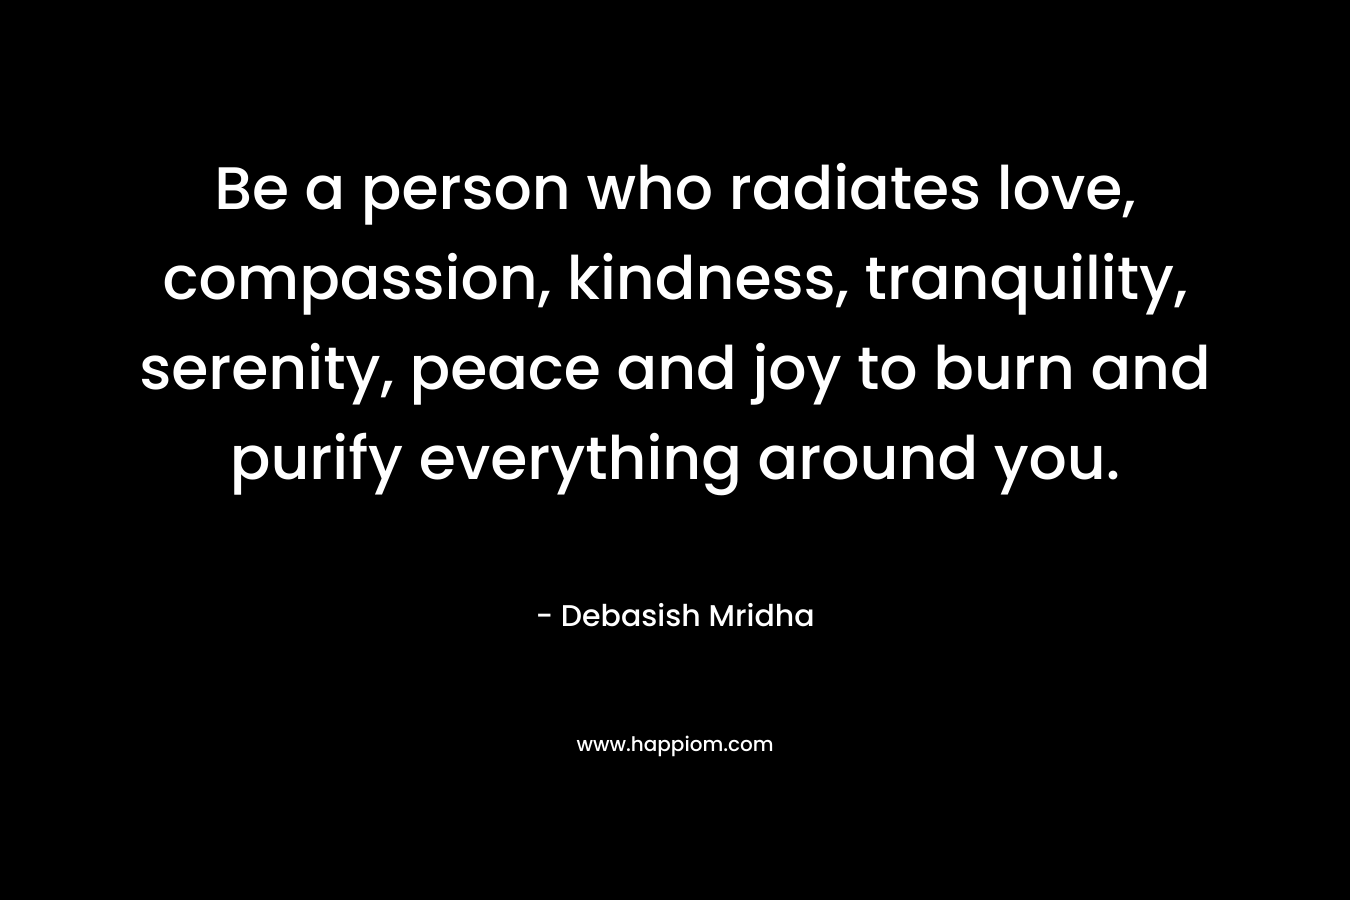 Be a person who radiates love, compassion, kindness, tranquility, serenity, peace and joy to burn and purify everything around you.